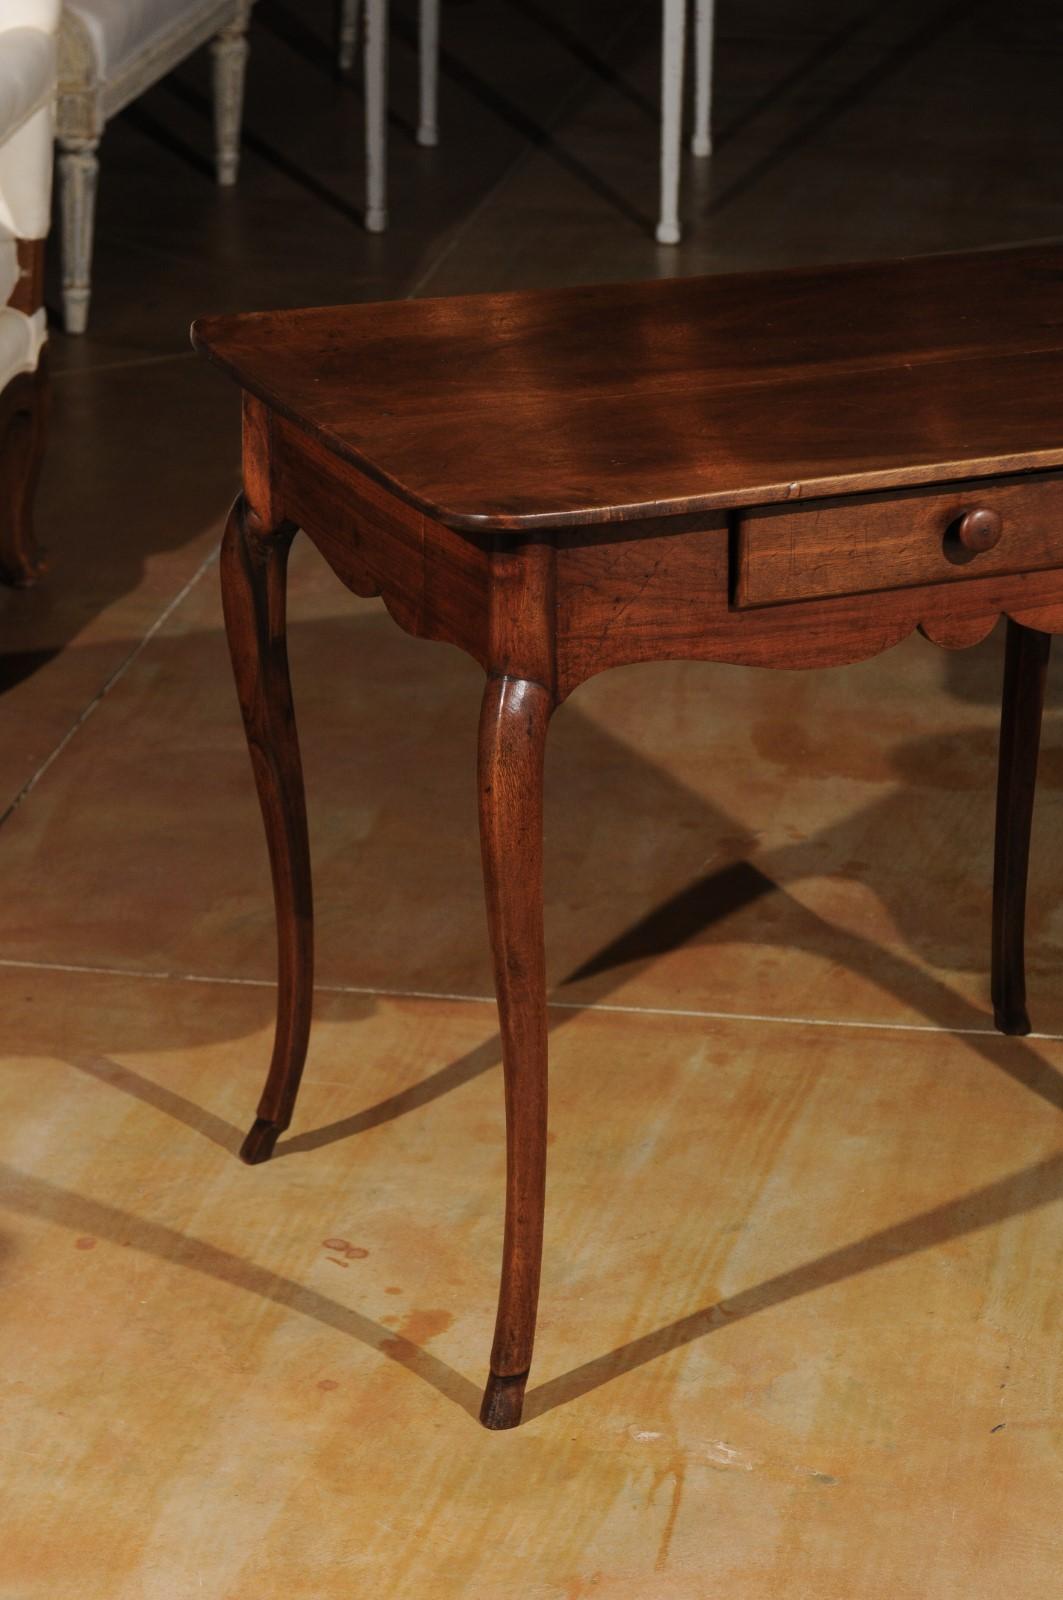 French 1750s Louis XV Walnut Table with Acacia Legs from the Rhône Valley (Französisch)